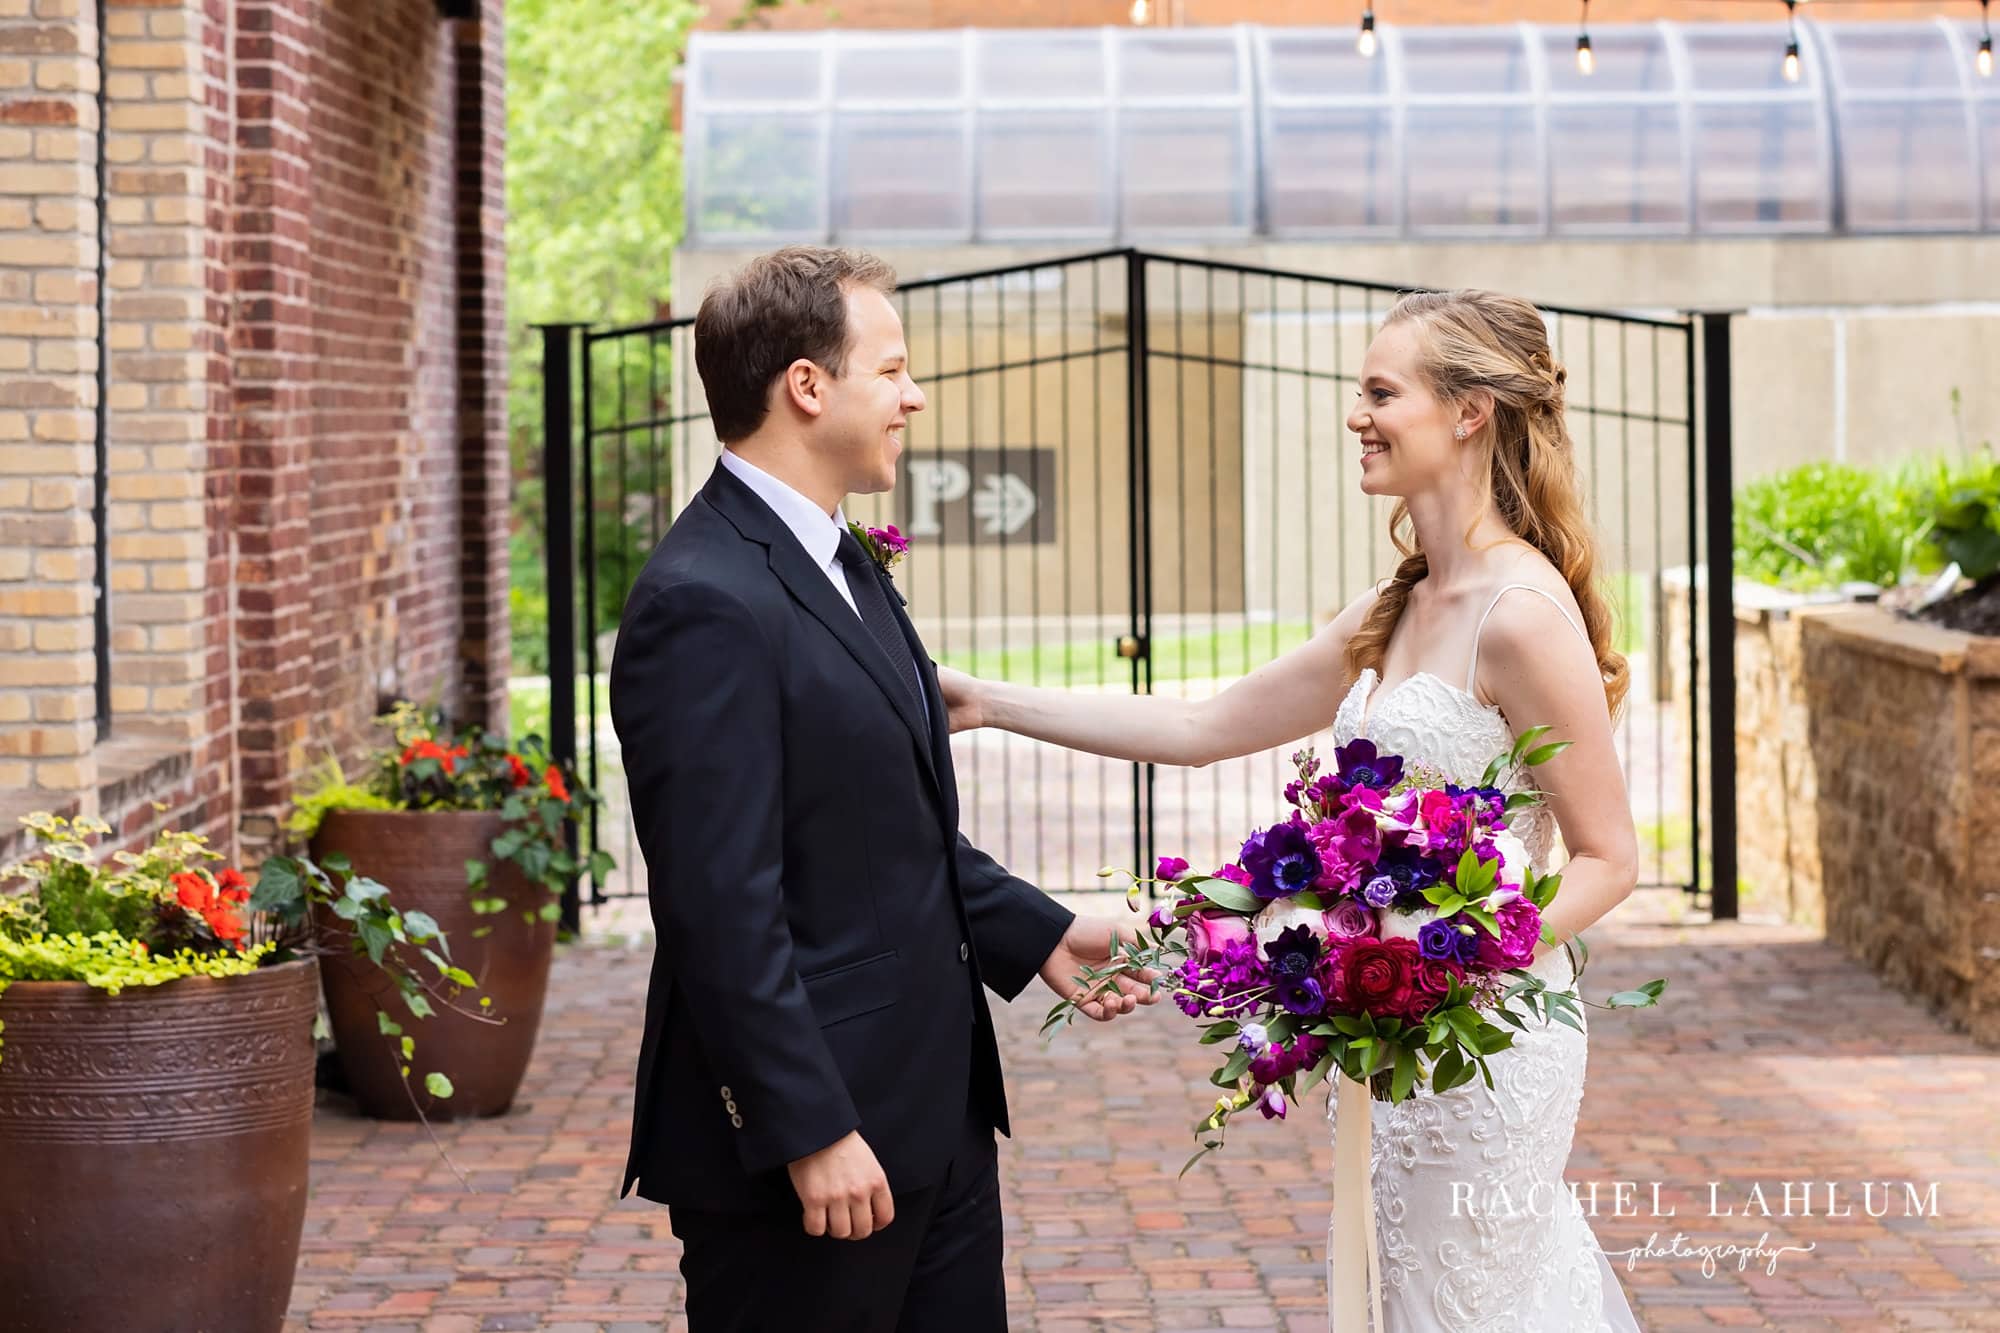 Bride and groom share a first look inside the courtyard at The Minneapolis Event Center.